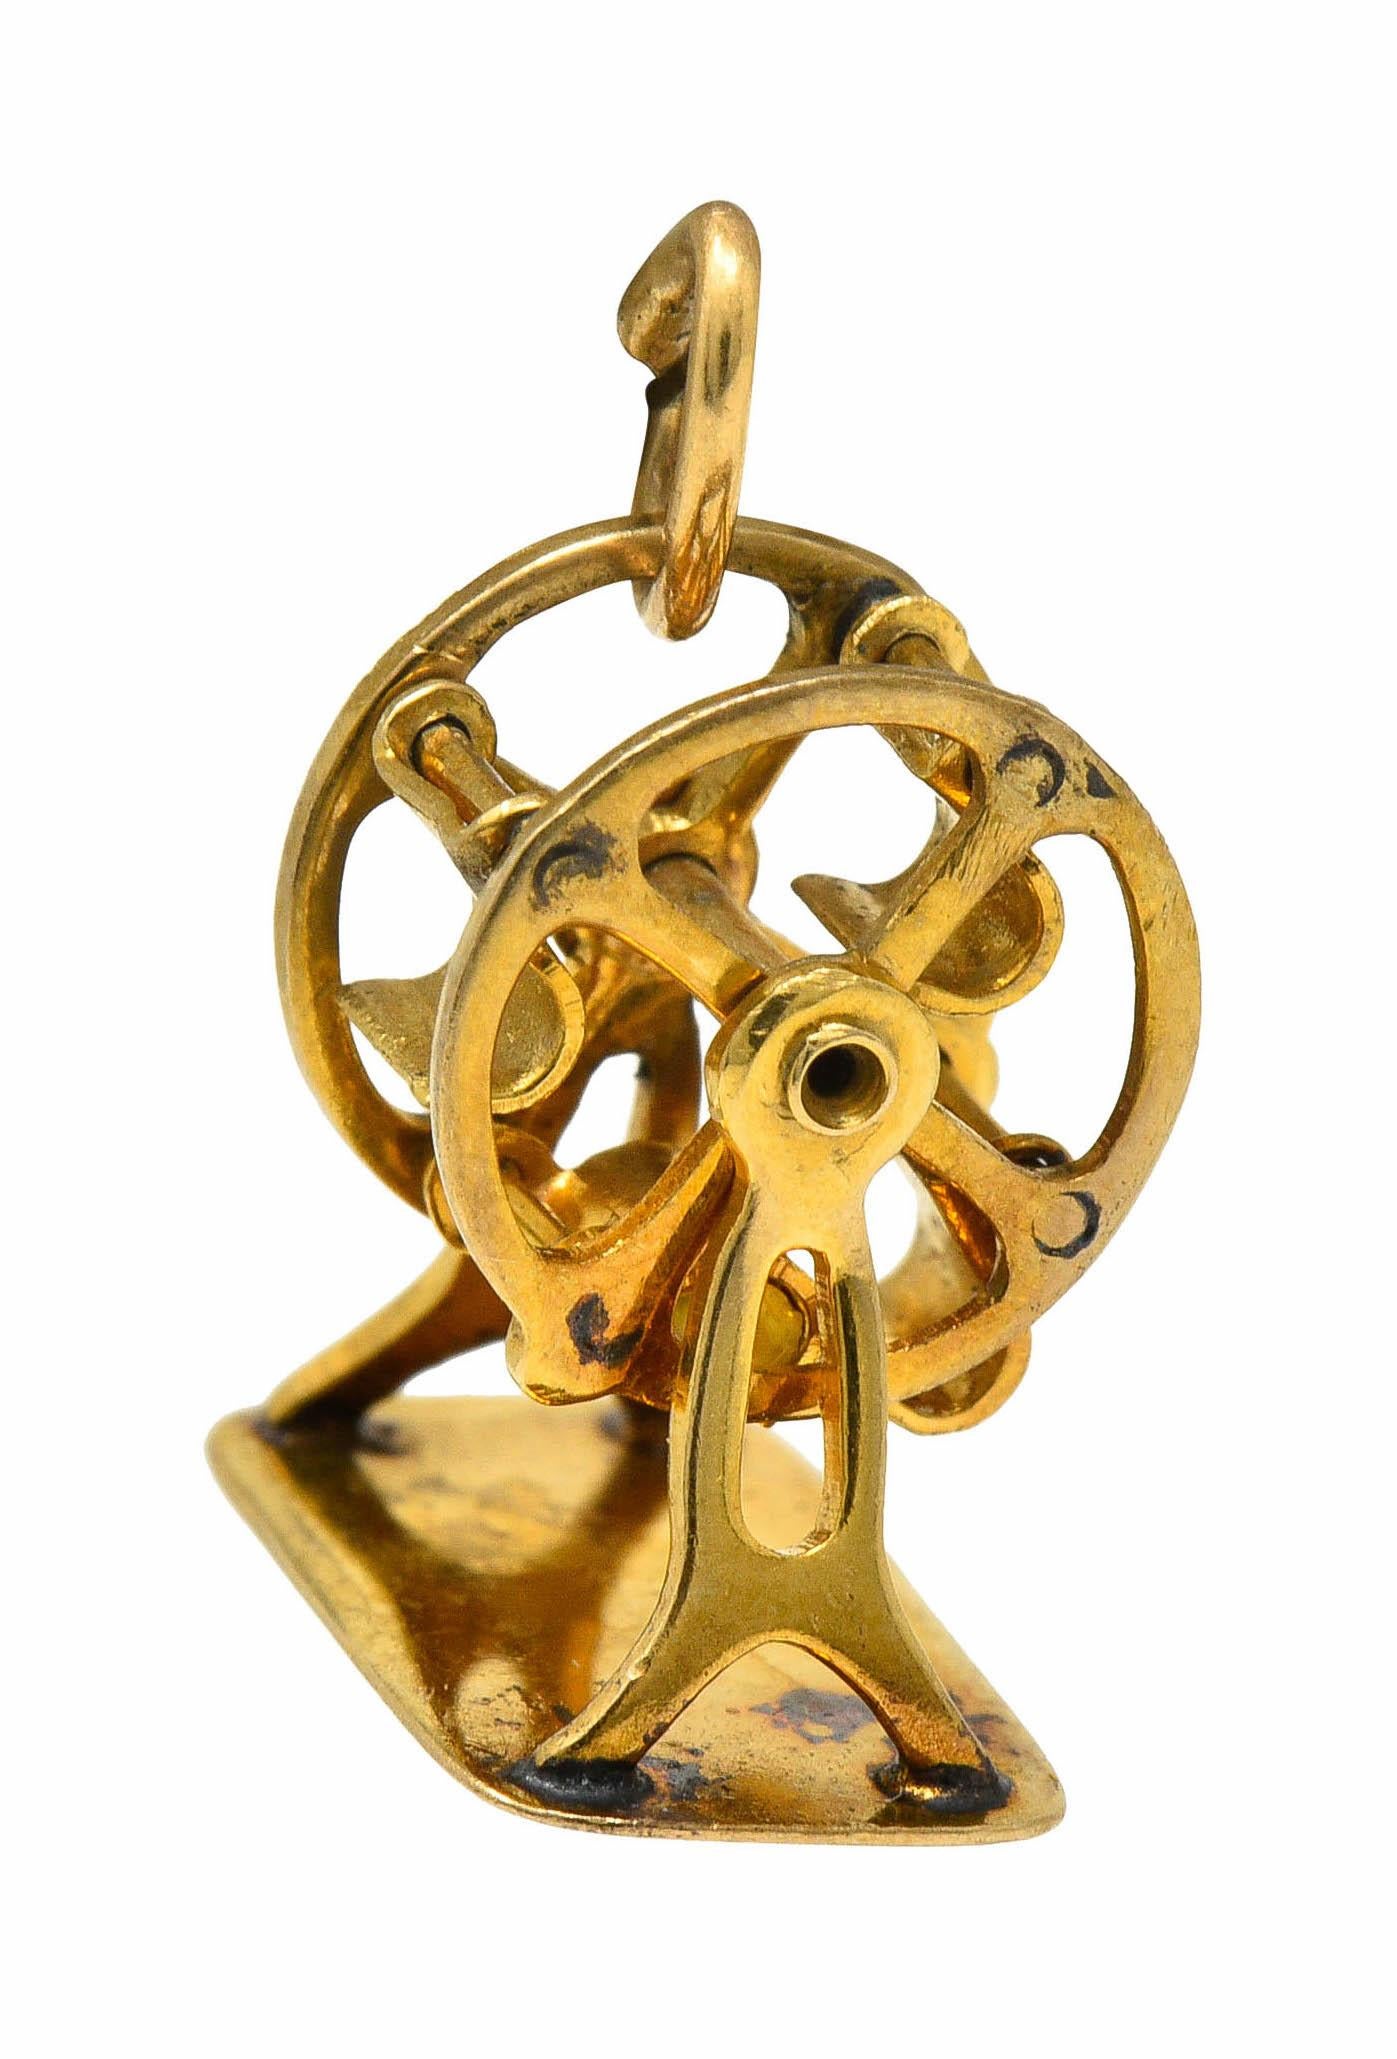 Designed as a circular rotating Ferris wheel within a polished gold frame

Fancifully pierced with articulated seats that dangle as wheel spins

Stamped 14K for 14 karat gold

Circa: 1950s

Measures: 1/2 x 1/2 inch

Total weight: 1.4 grams

Fun.